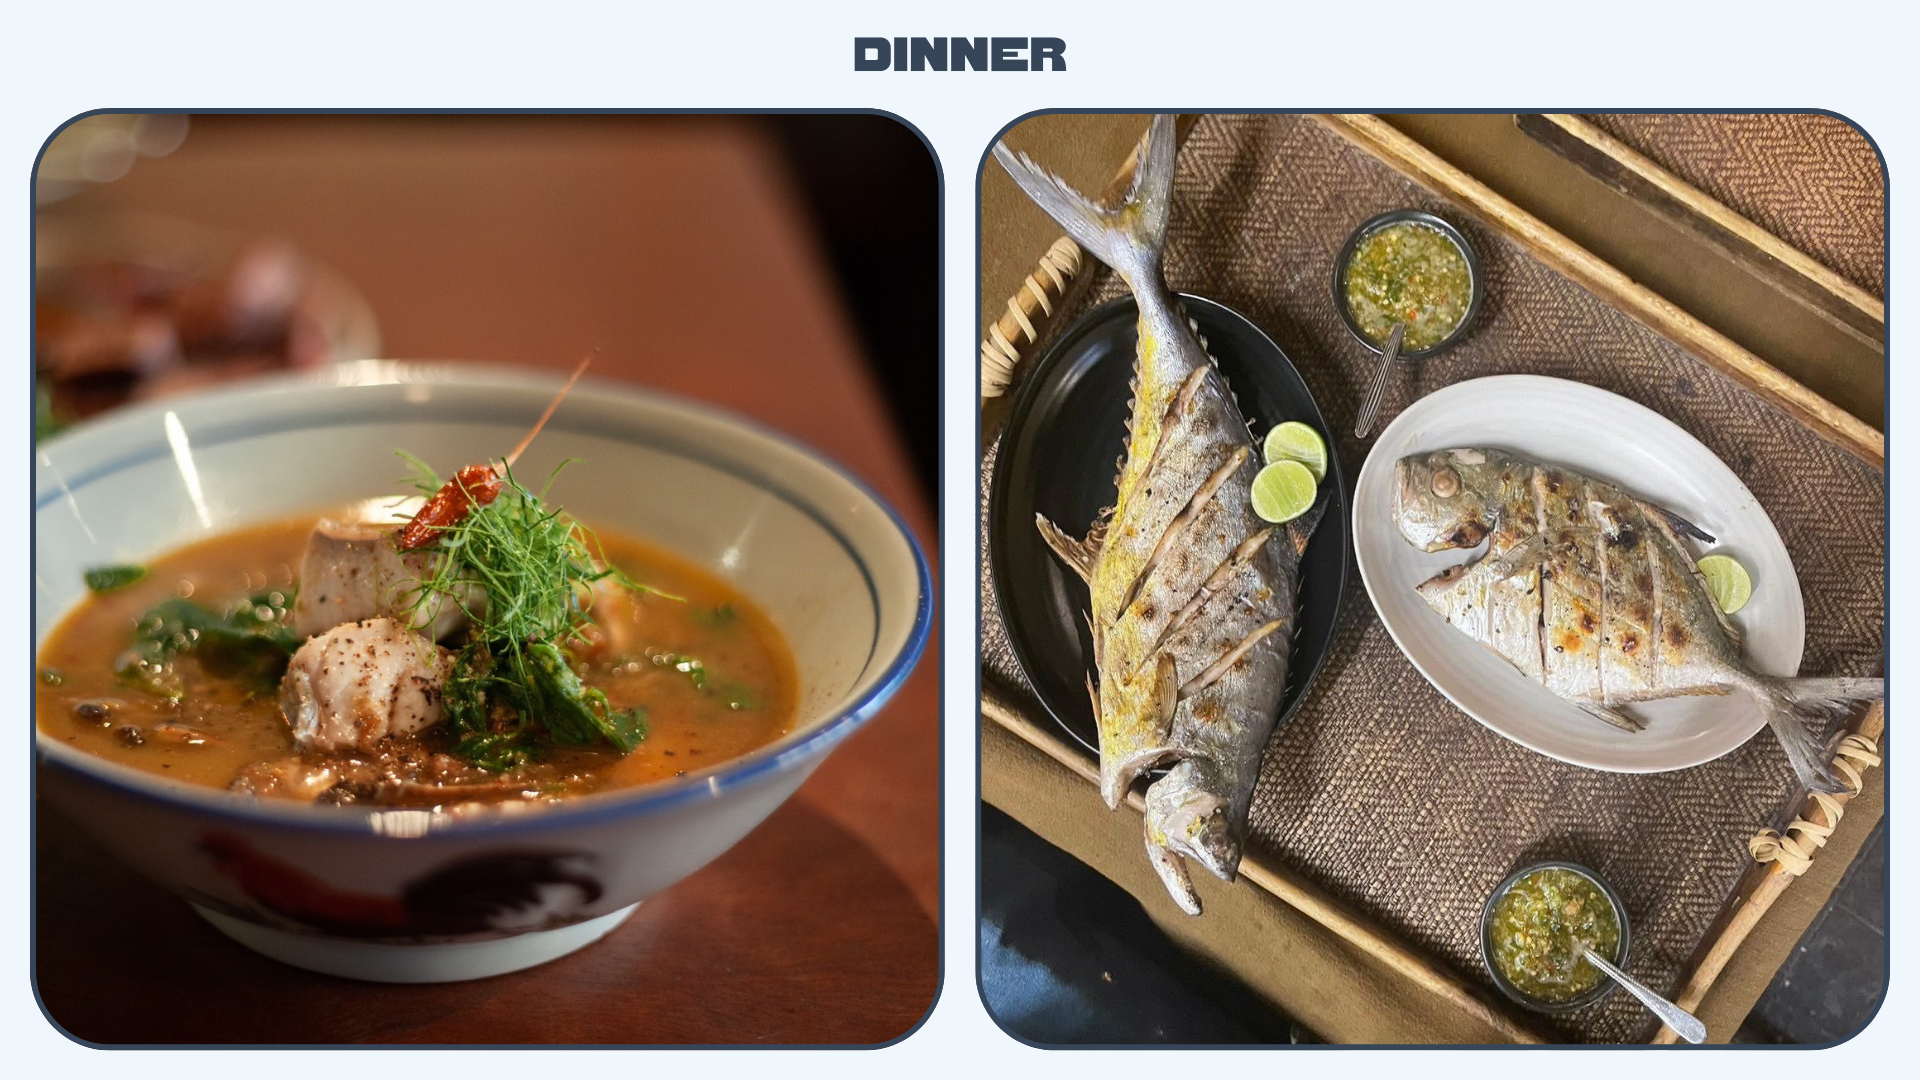 Images of dinner dishes, curry and grilled fish, from restaurants in Chiang Mai